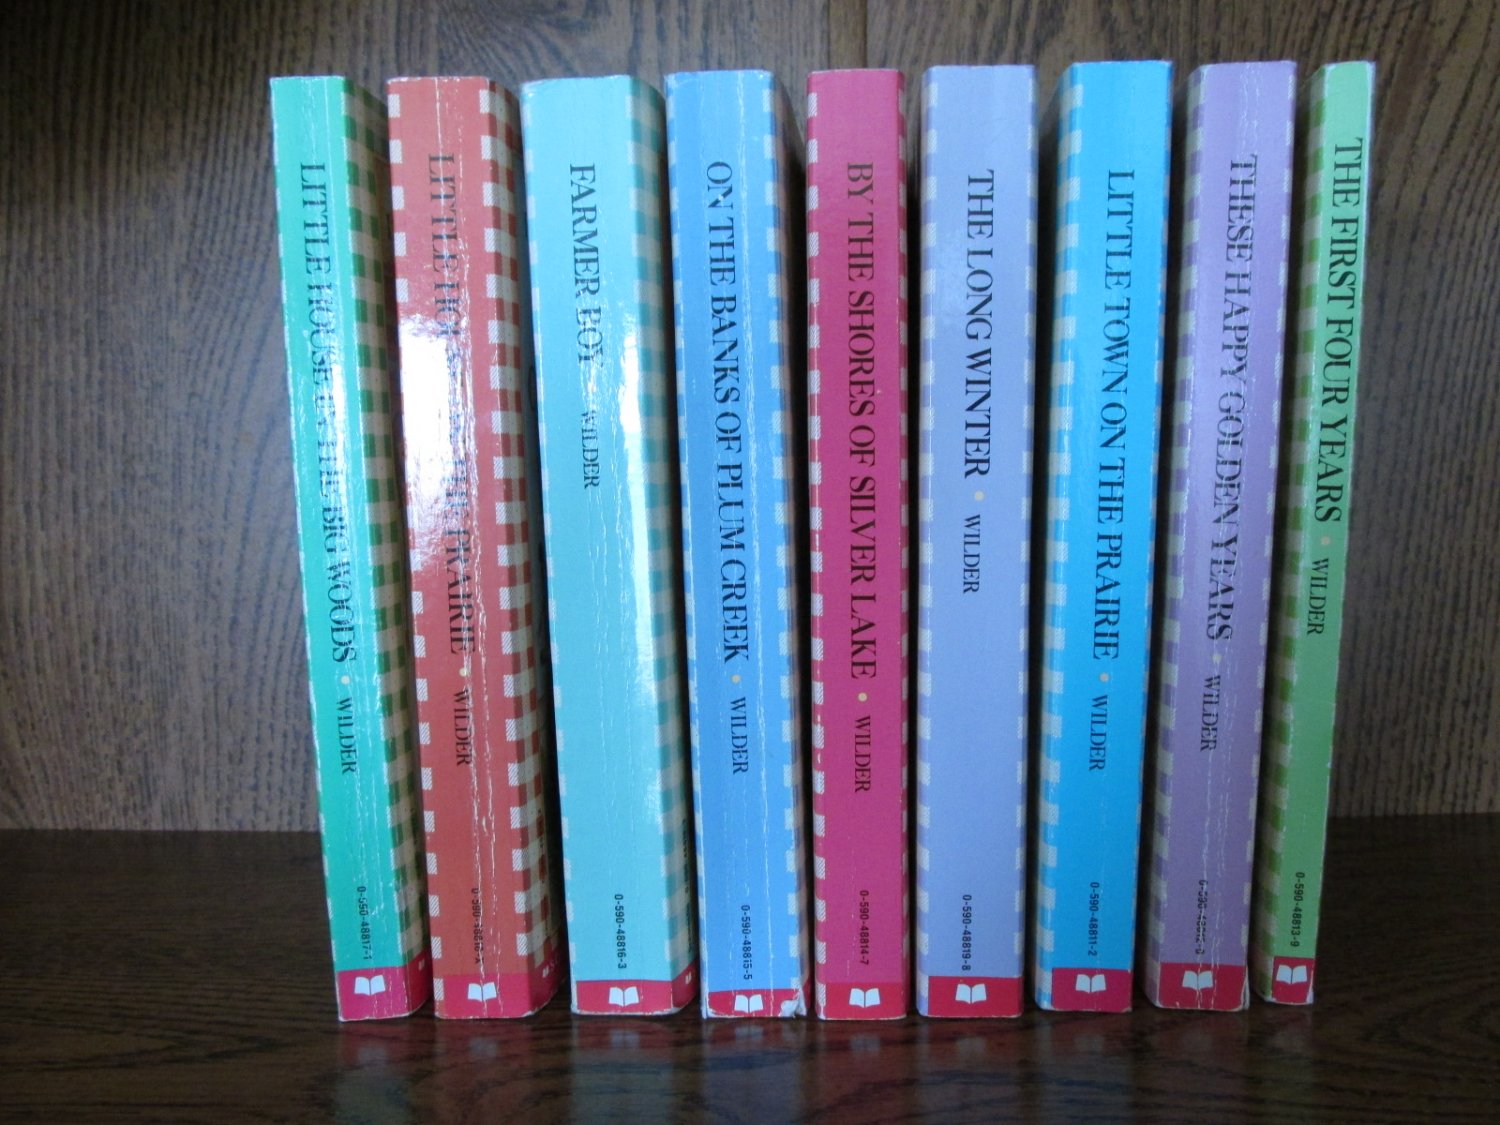 little house on the prairie complete book set